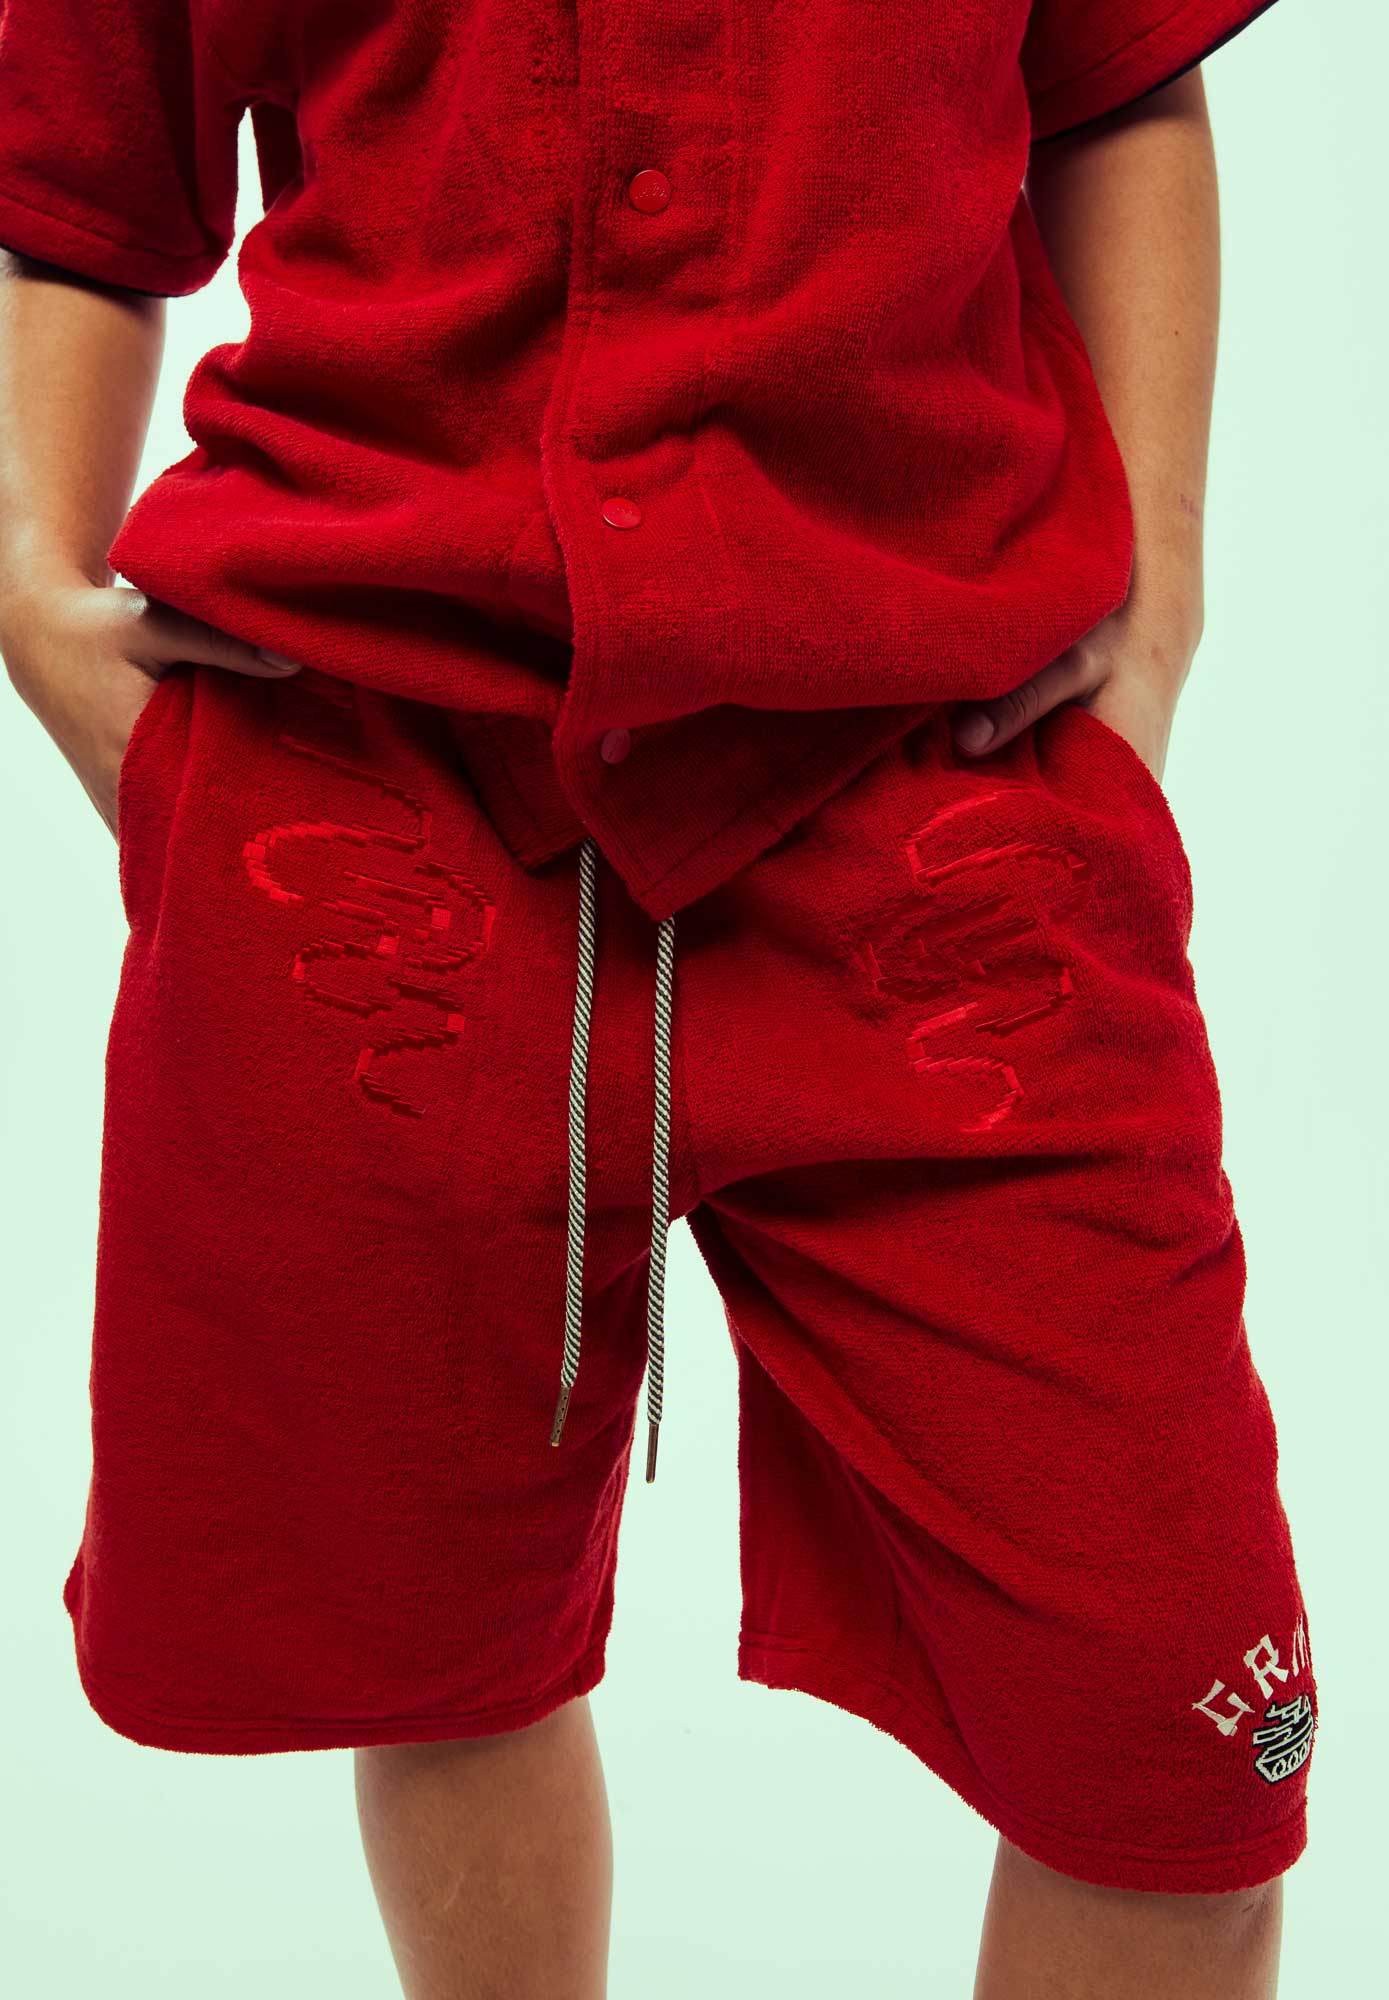 LUCKY DRAGON TERRY TOWELLING BAGGY SWEATSHORTS RED